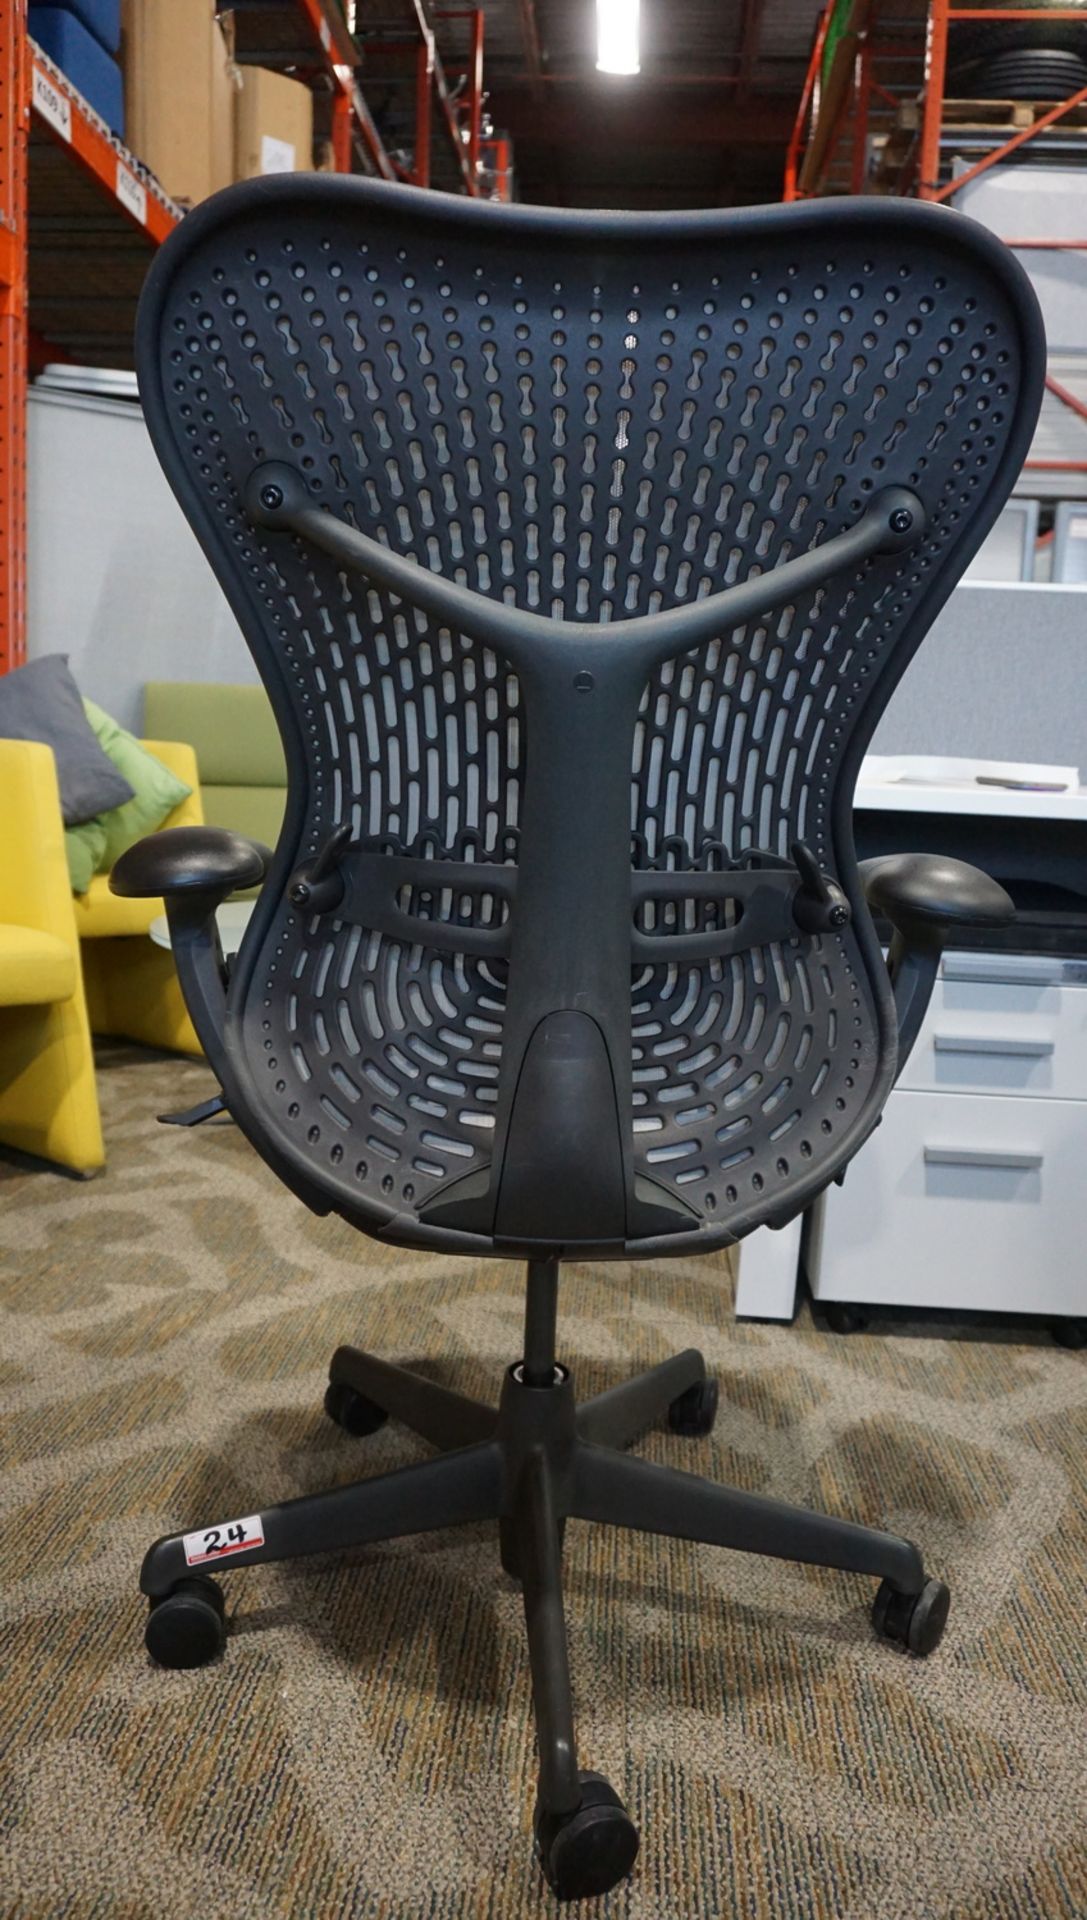 HERMAN MILLER MIRRA 1 OFFICE CHAIR W/ LUMBAR SUPPORT, BACK LOCK, ARM / SEAT ADJUSTMENTS - Image 3 of 5